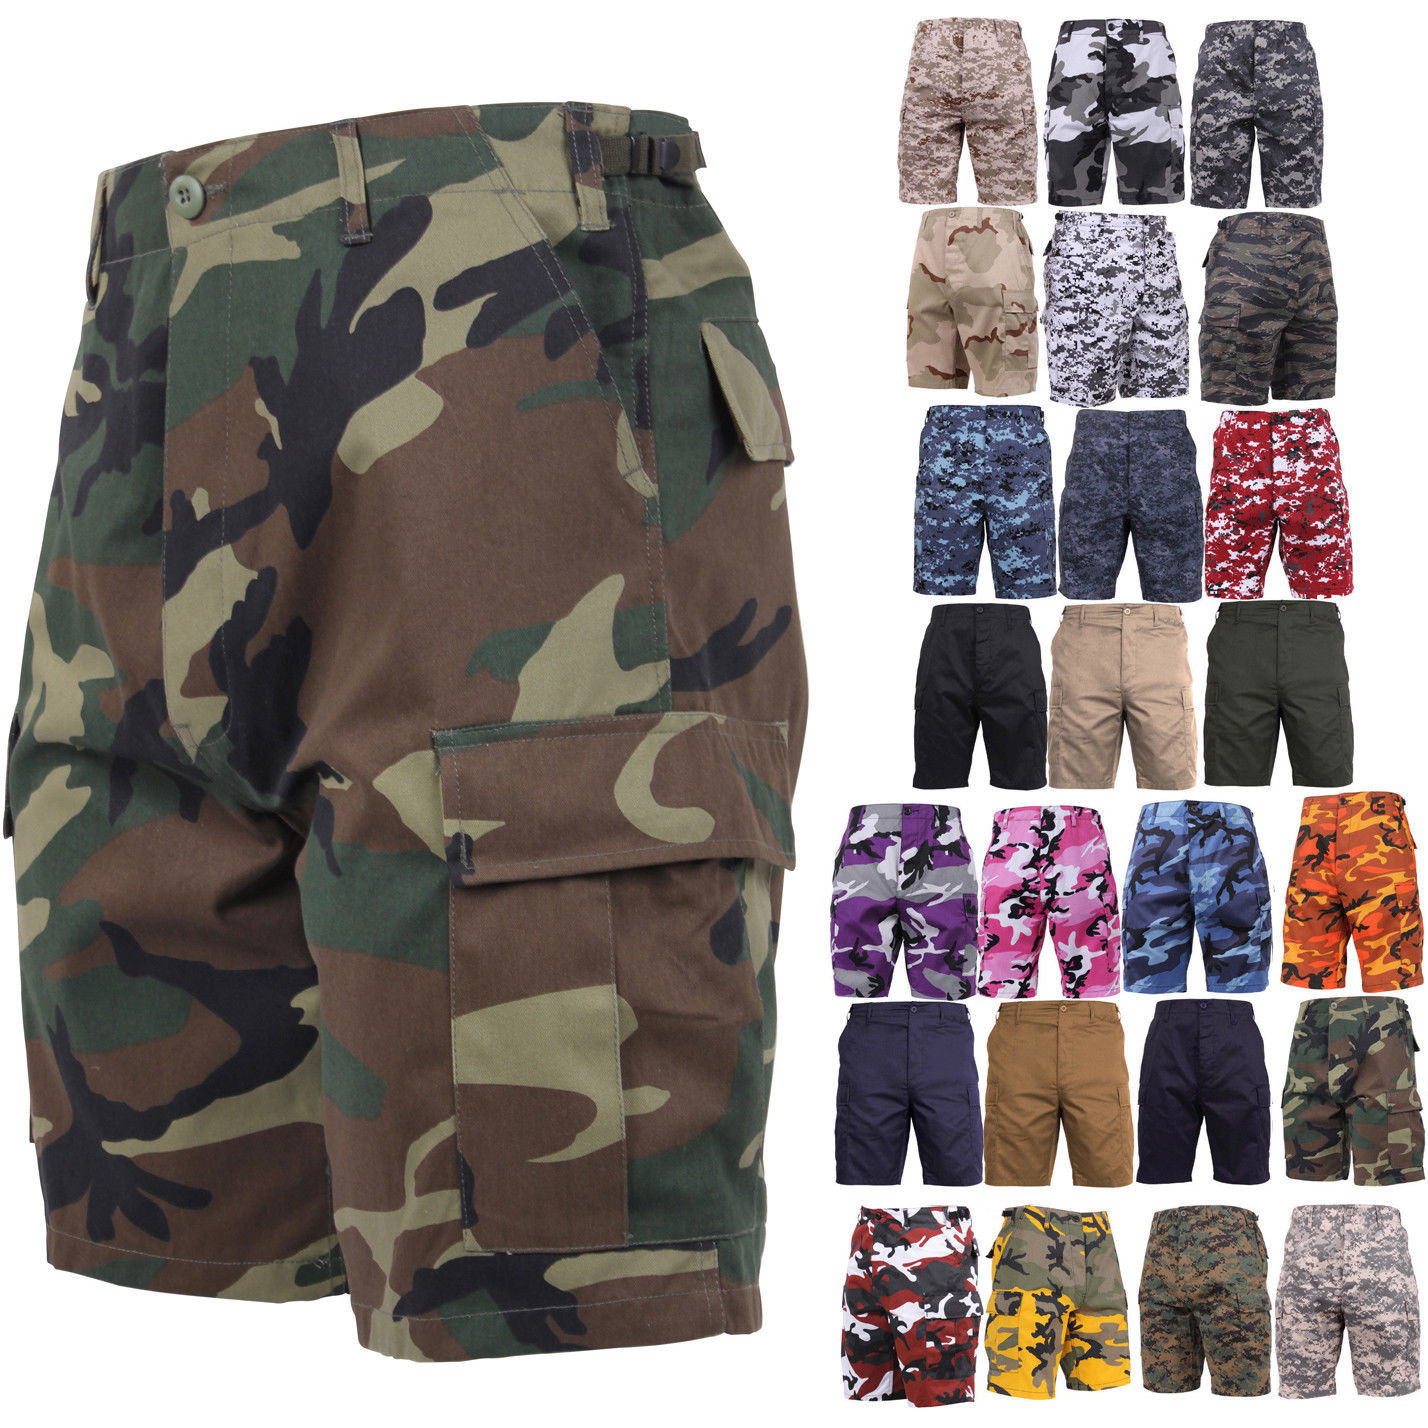 Army Fatigue Cargo Shorts: A Stylish and Functional Choice for Any Occasion